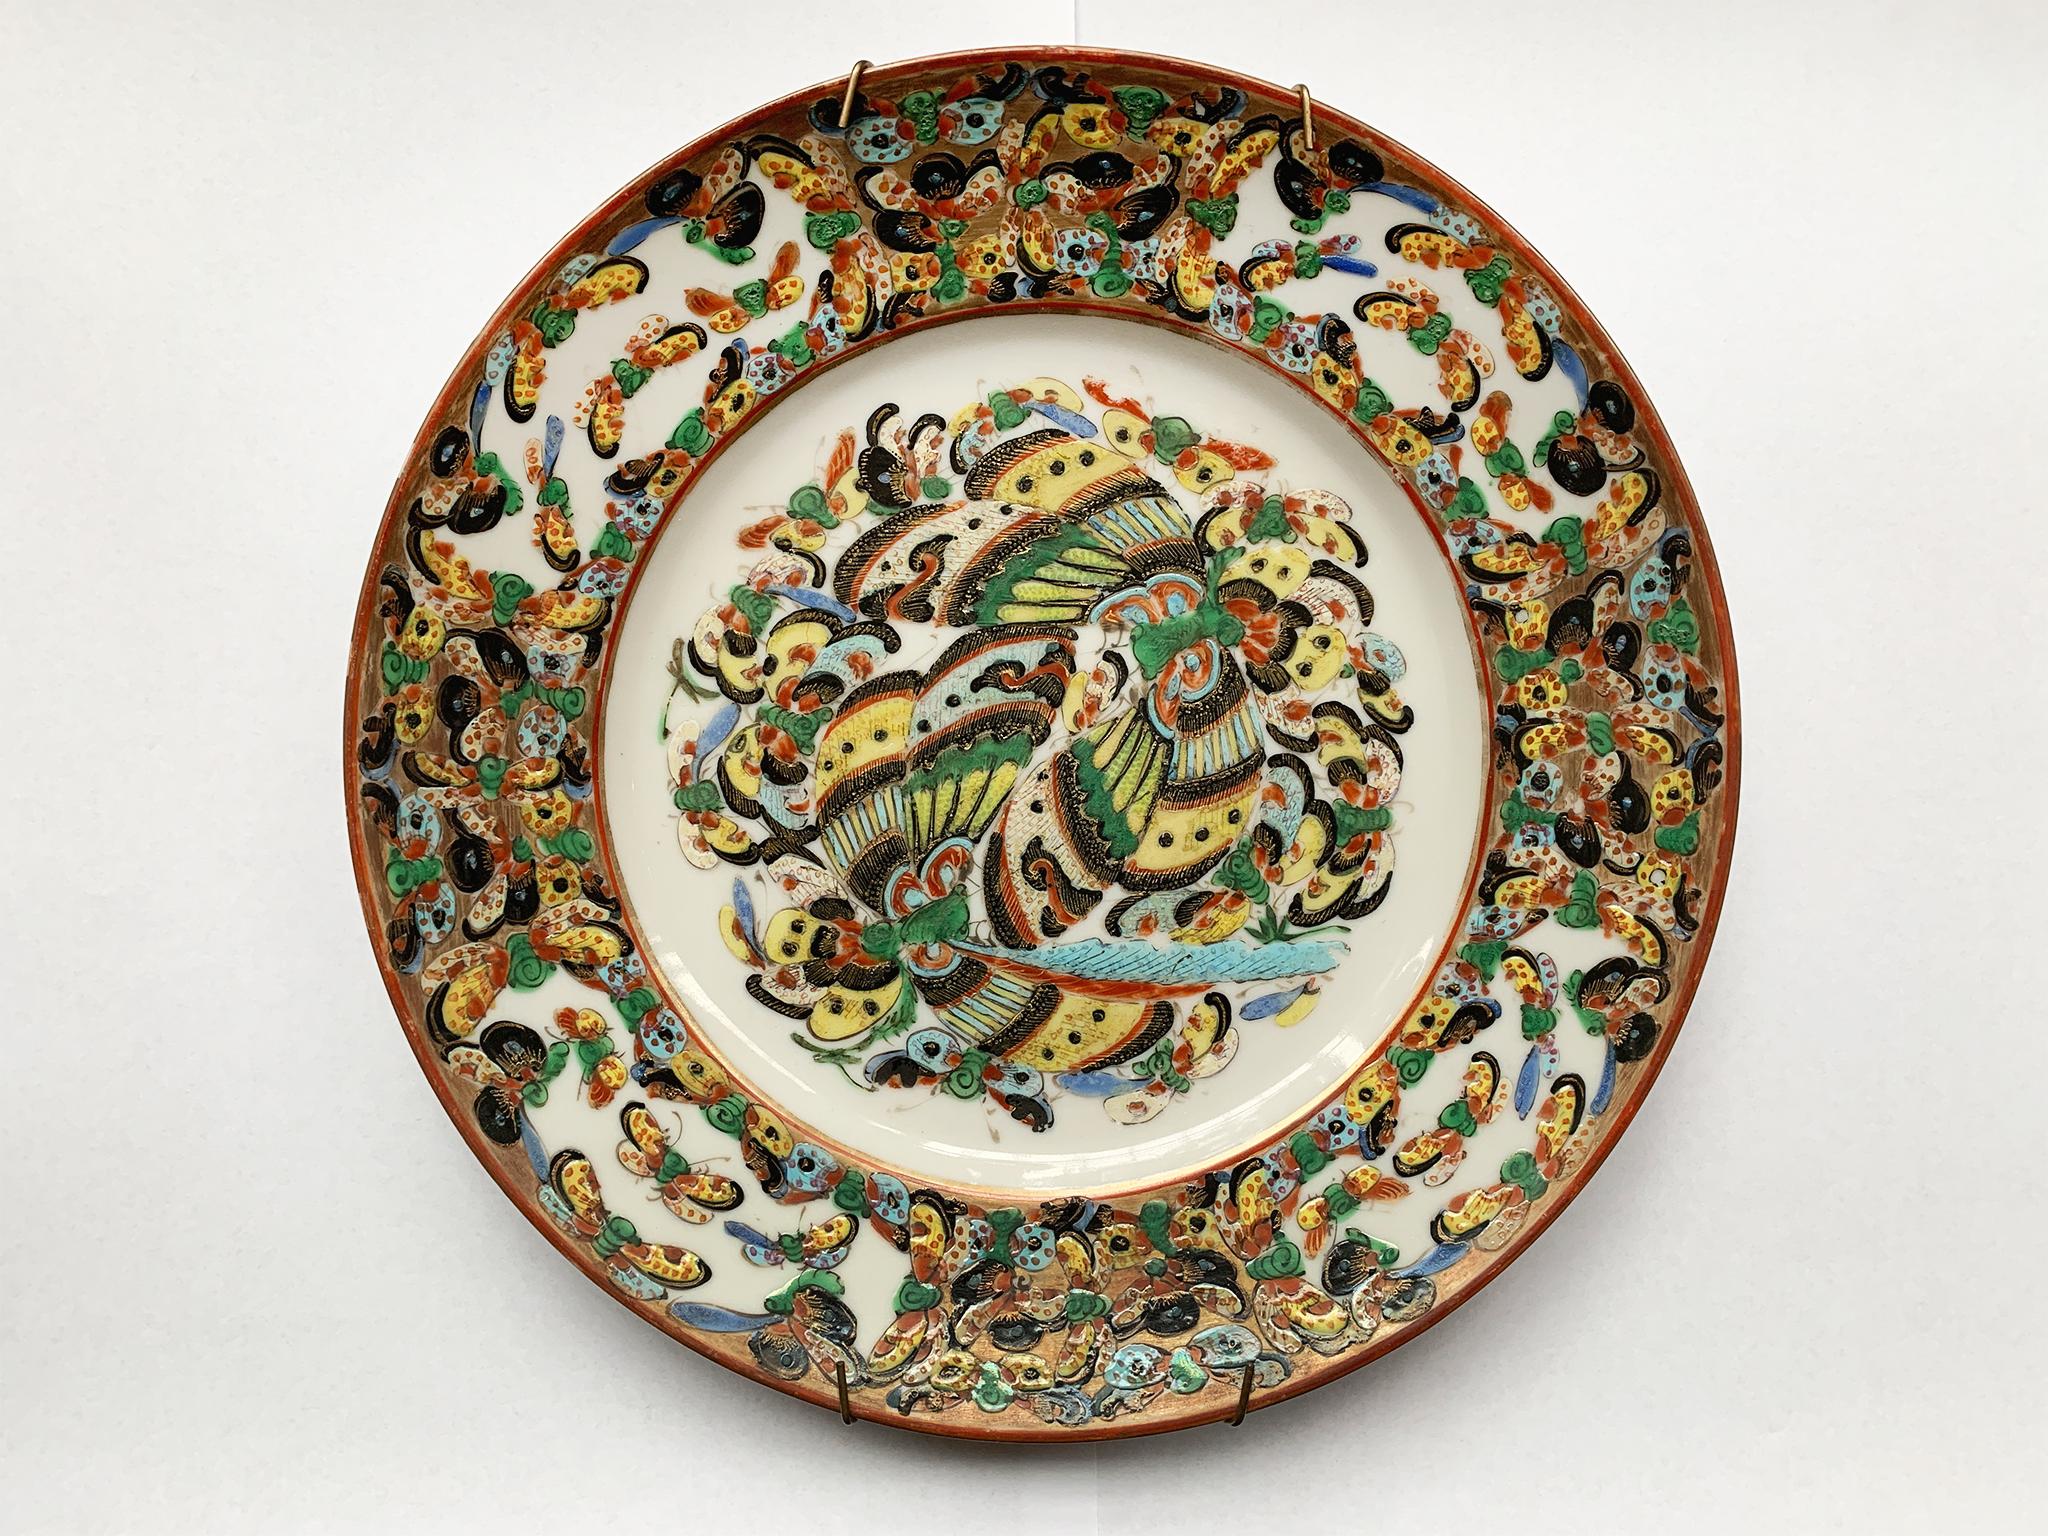 A set of six 20th century decorative porcelain plates from China. The rich, colorful design is rendered in enamel paint with a palette of reds, blues, greens, yellows, black, and gold. At center is a cluster of butterflies. The surrounding border is